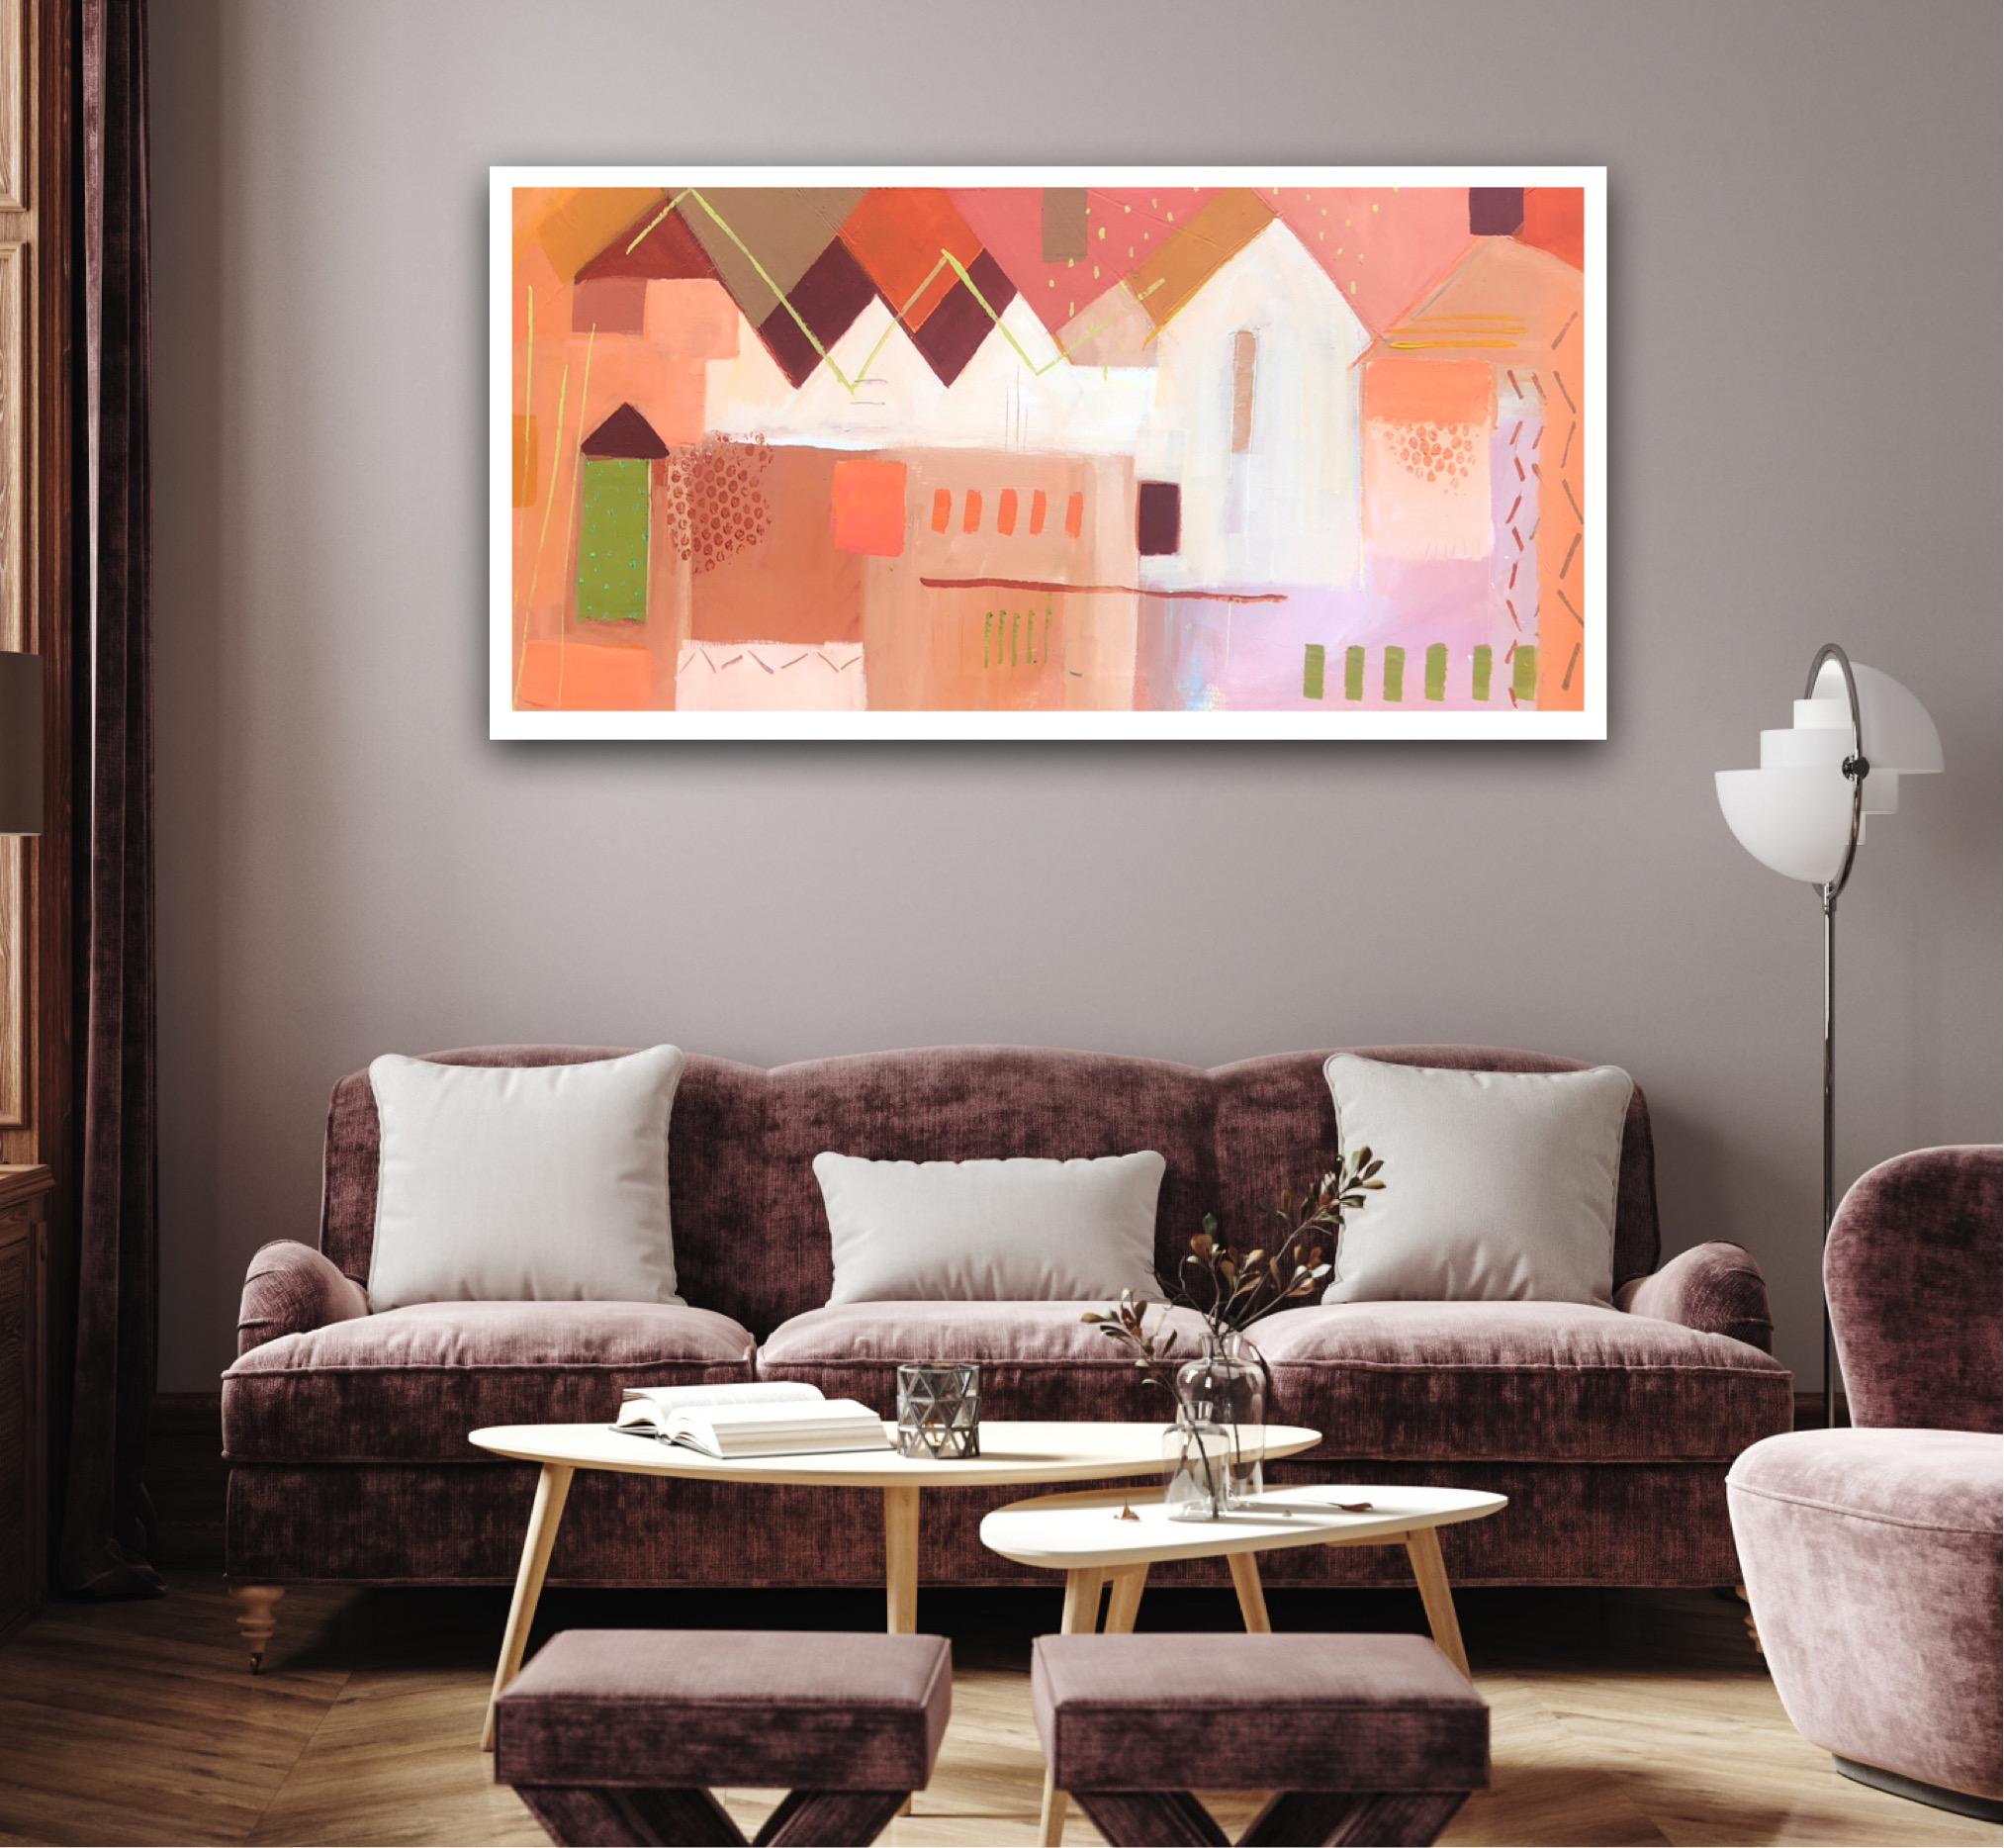 Bryggen Facades 6 by Maggie LaPorte-Banks, Original painting, Abstract Art, Pink For Sale 2